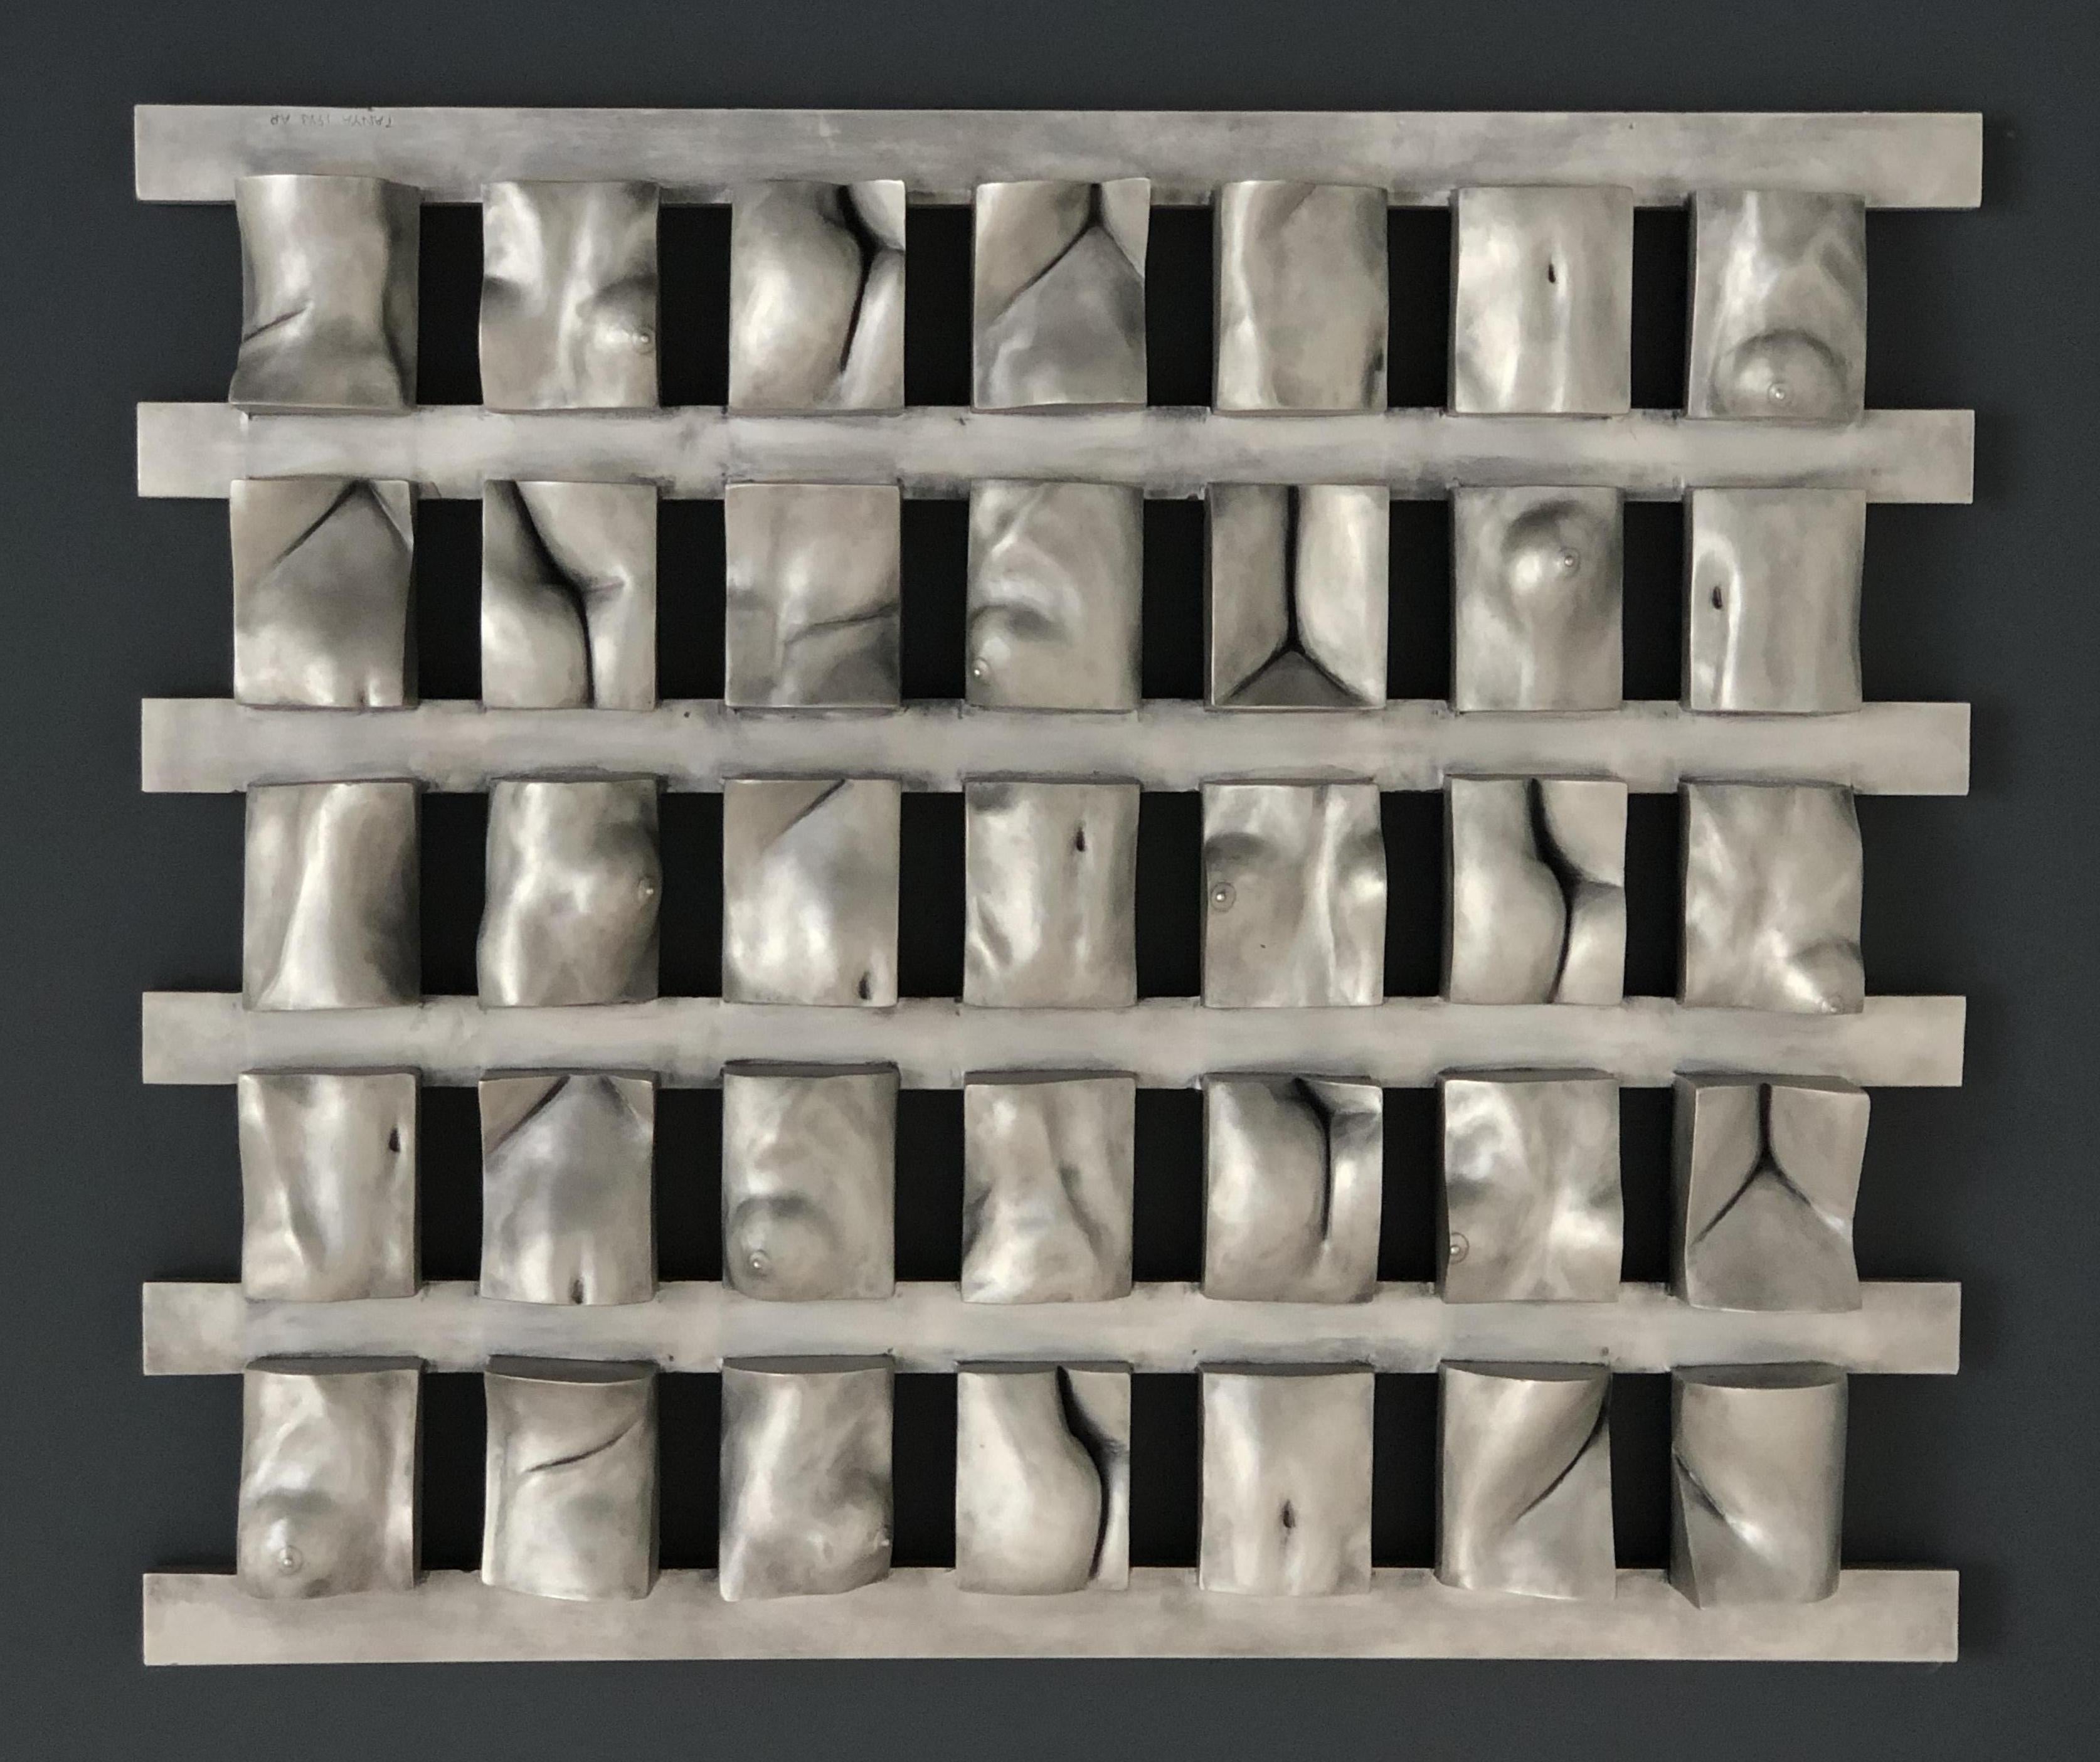 This aluminum wall-mounted sculpture brings together thirty five individually sculpted and cast figurative elements that are then welded to extruded aluminum bars. Produced in a limited edition of 3.

Dimensions:
25 x 29 inches

If you are